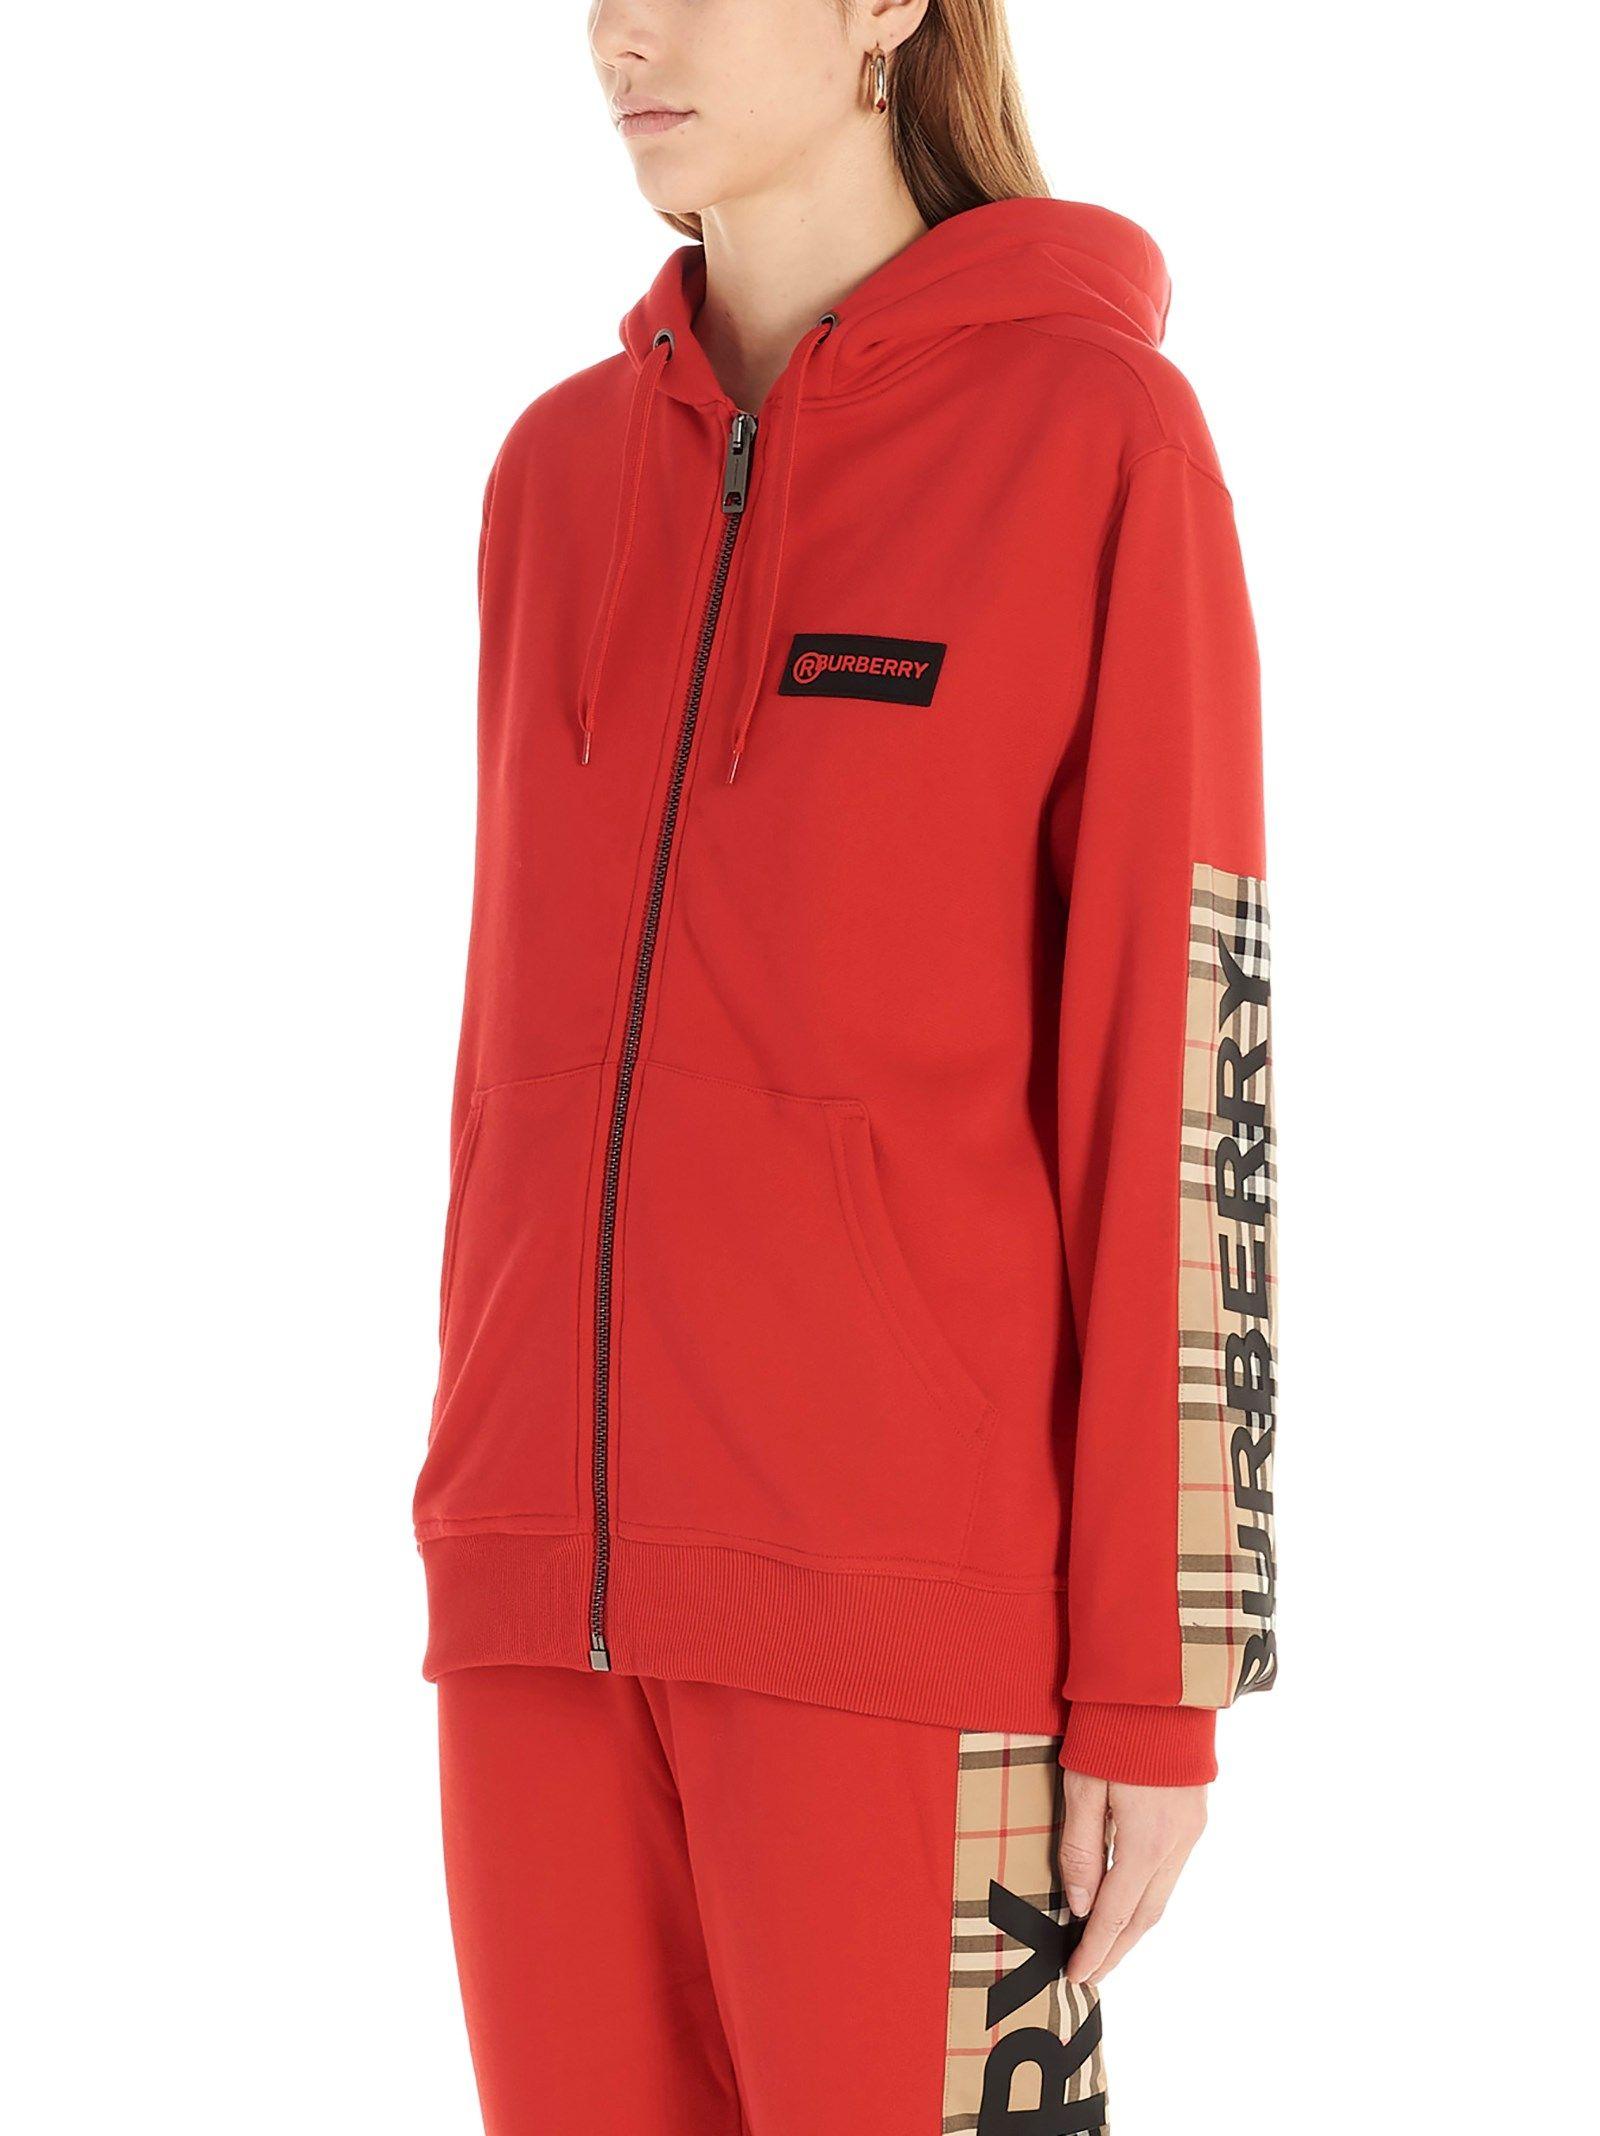 Burberry Vintage Check Zipped Hoodie in Red | Lyst